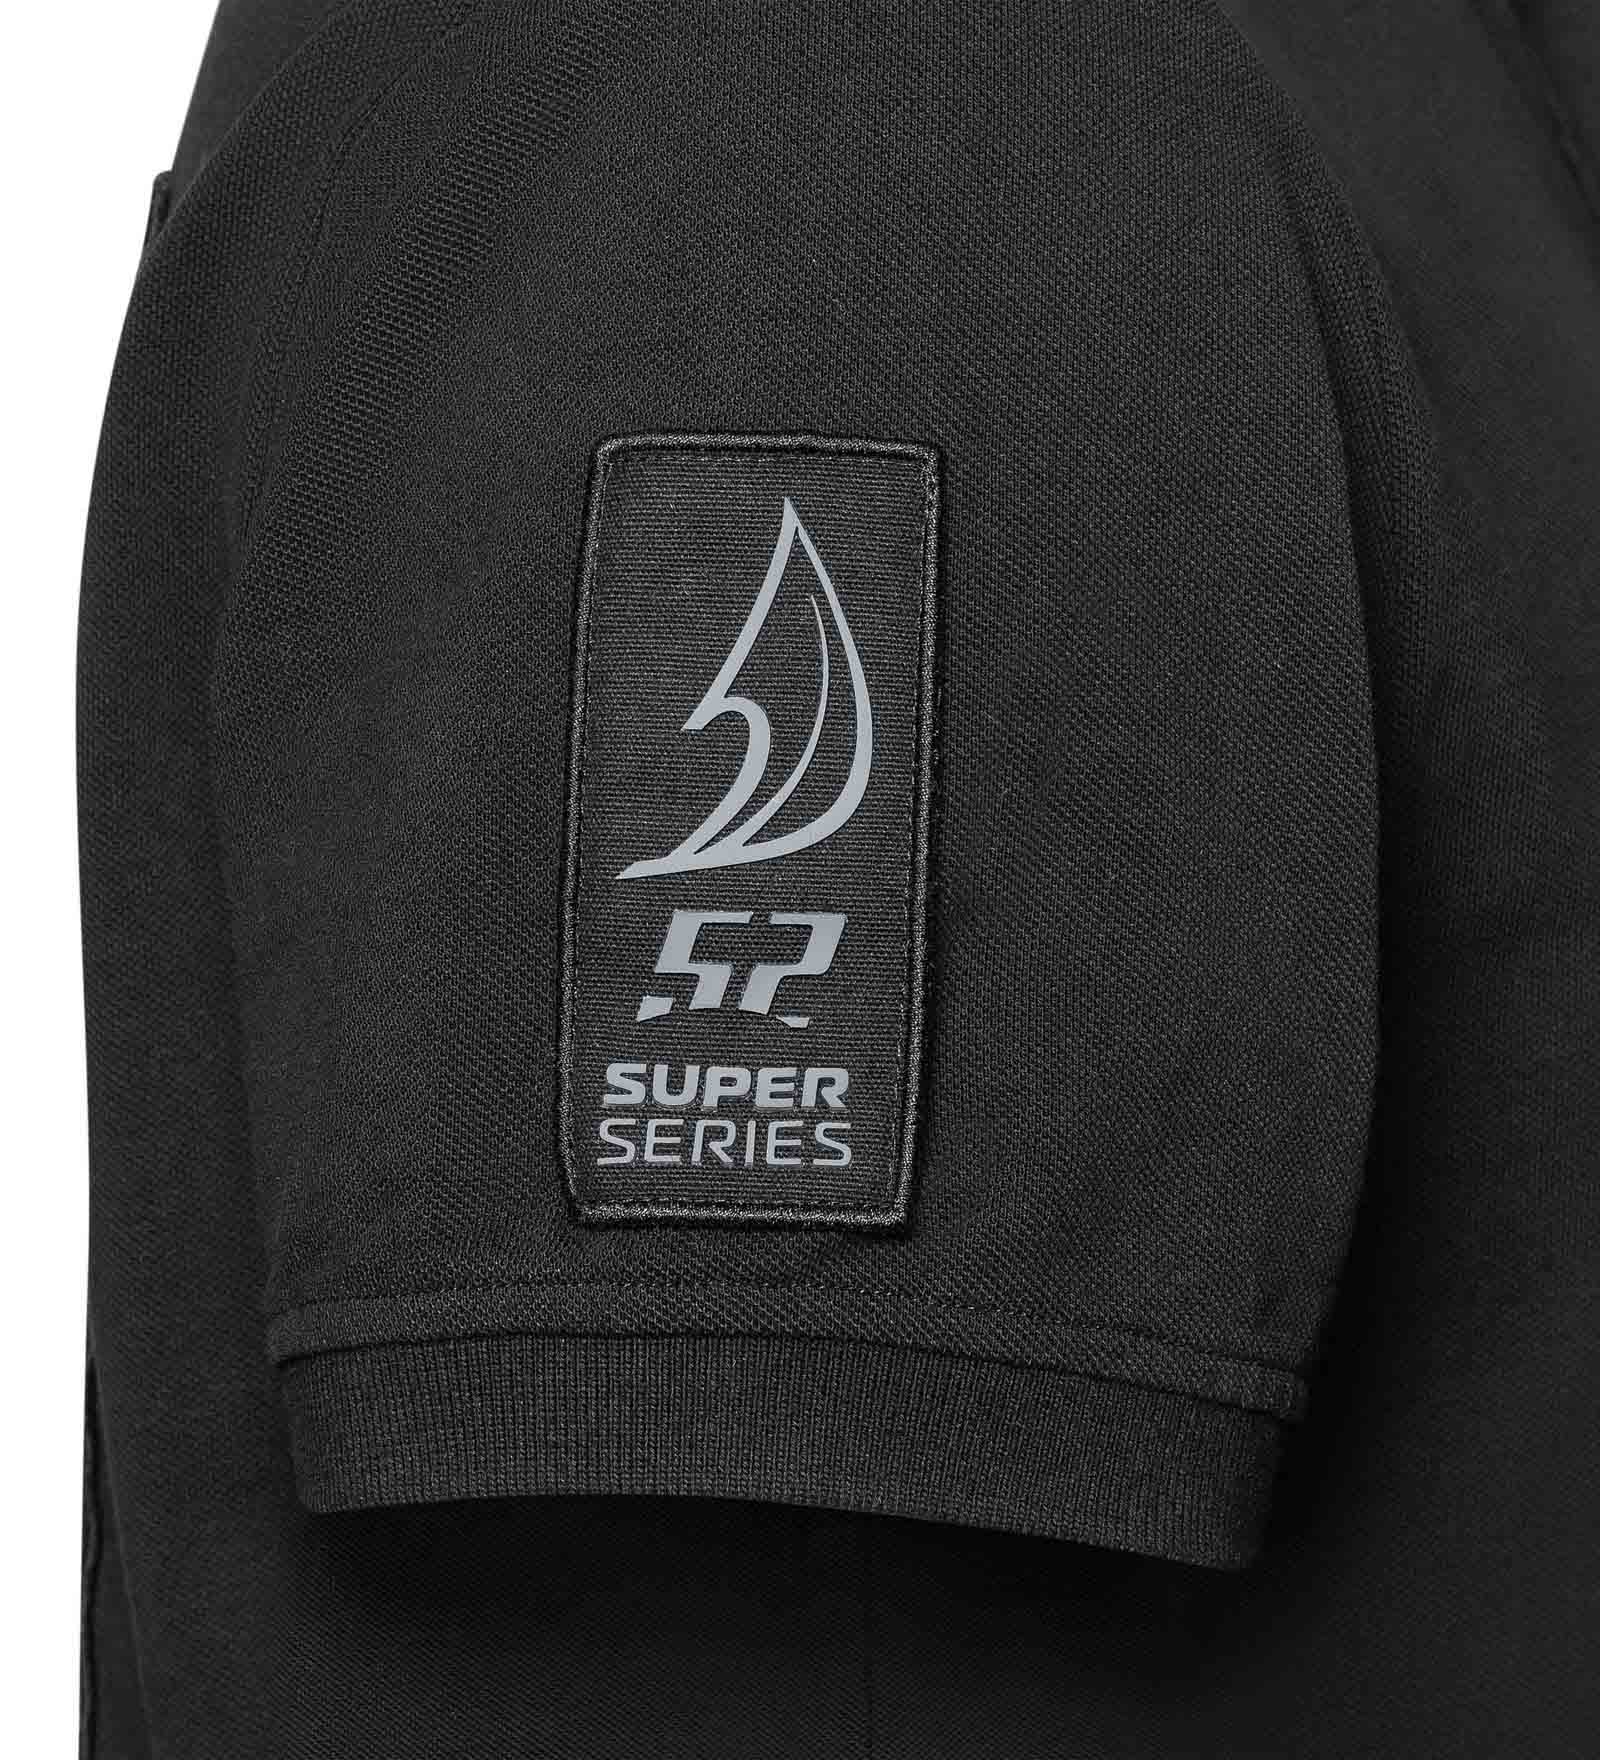 52 SUPER SERIES embroidery on polo shirt